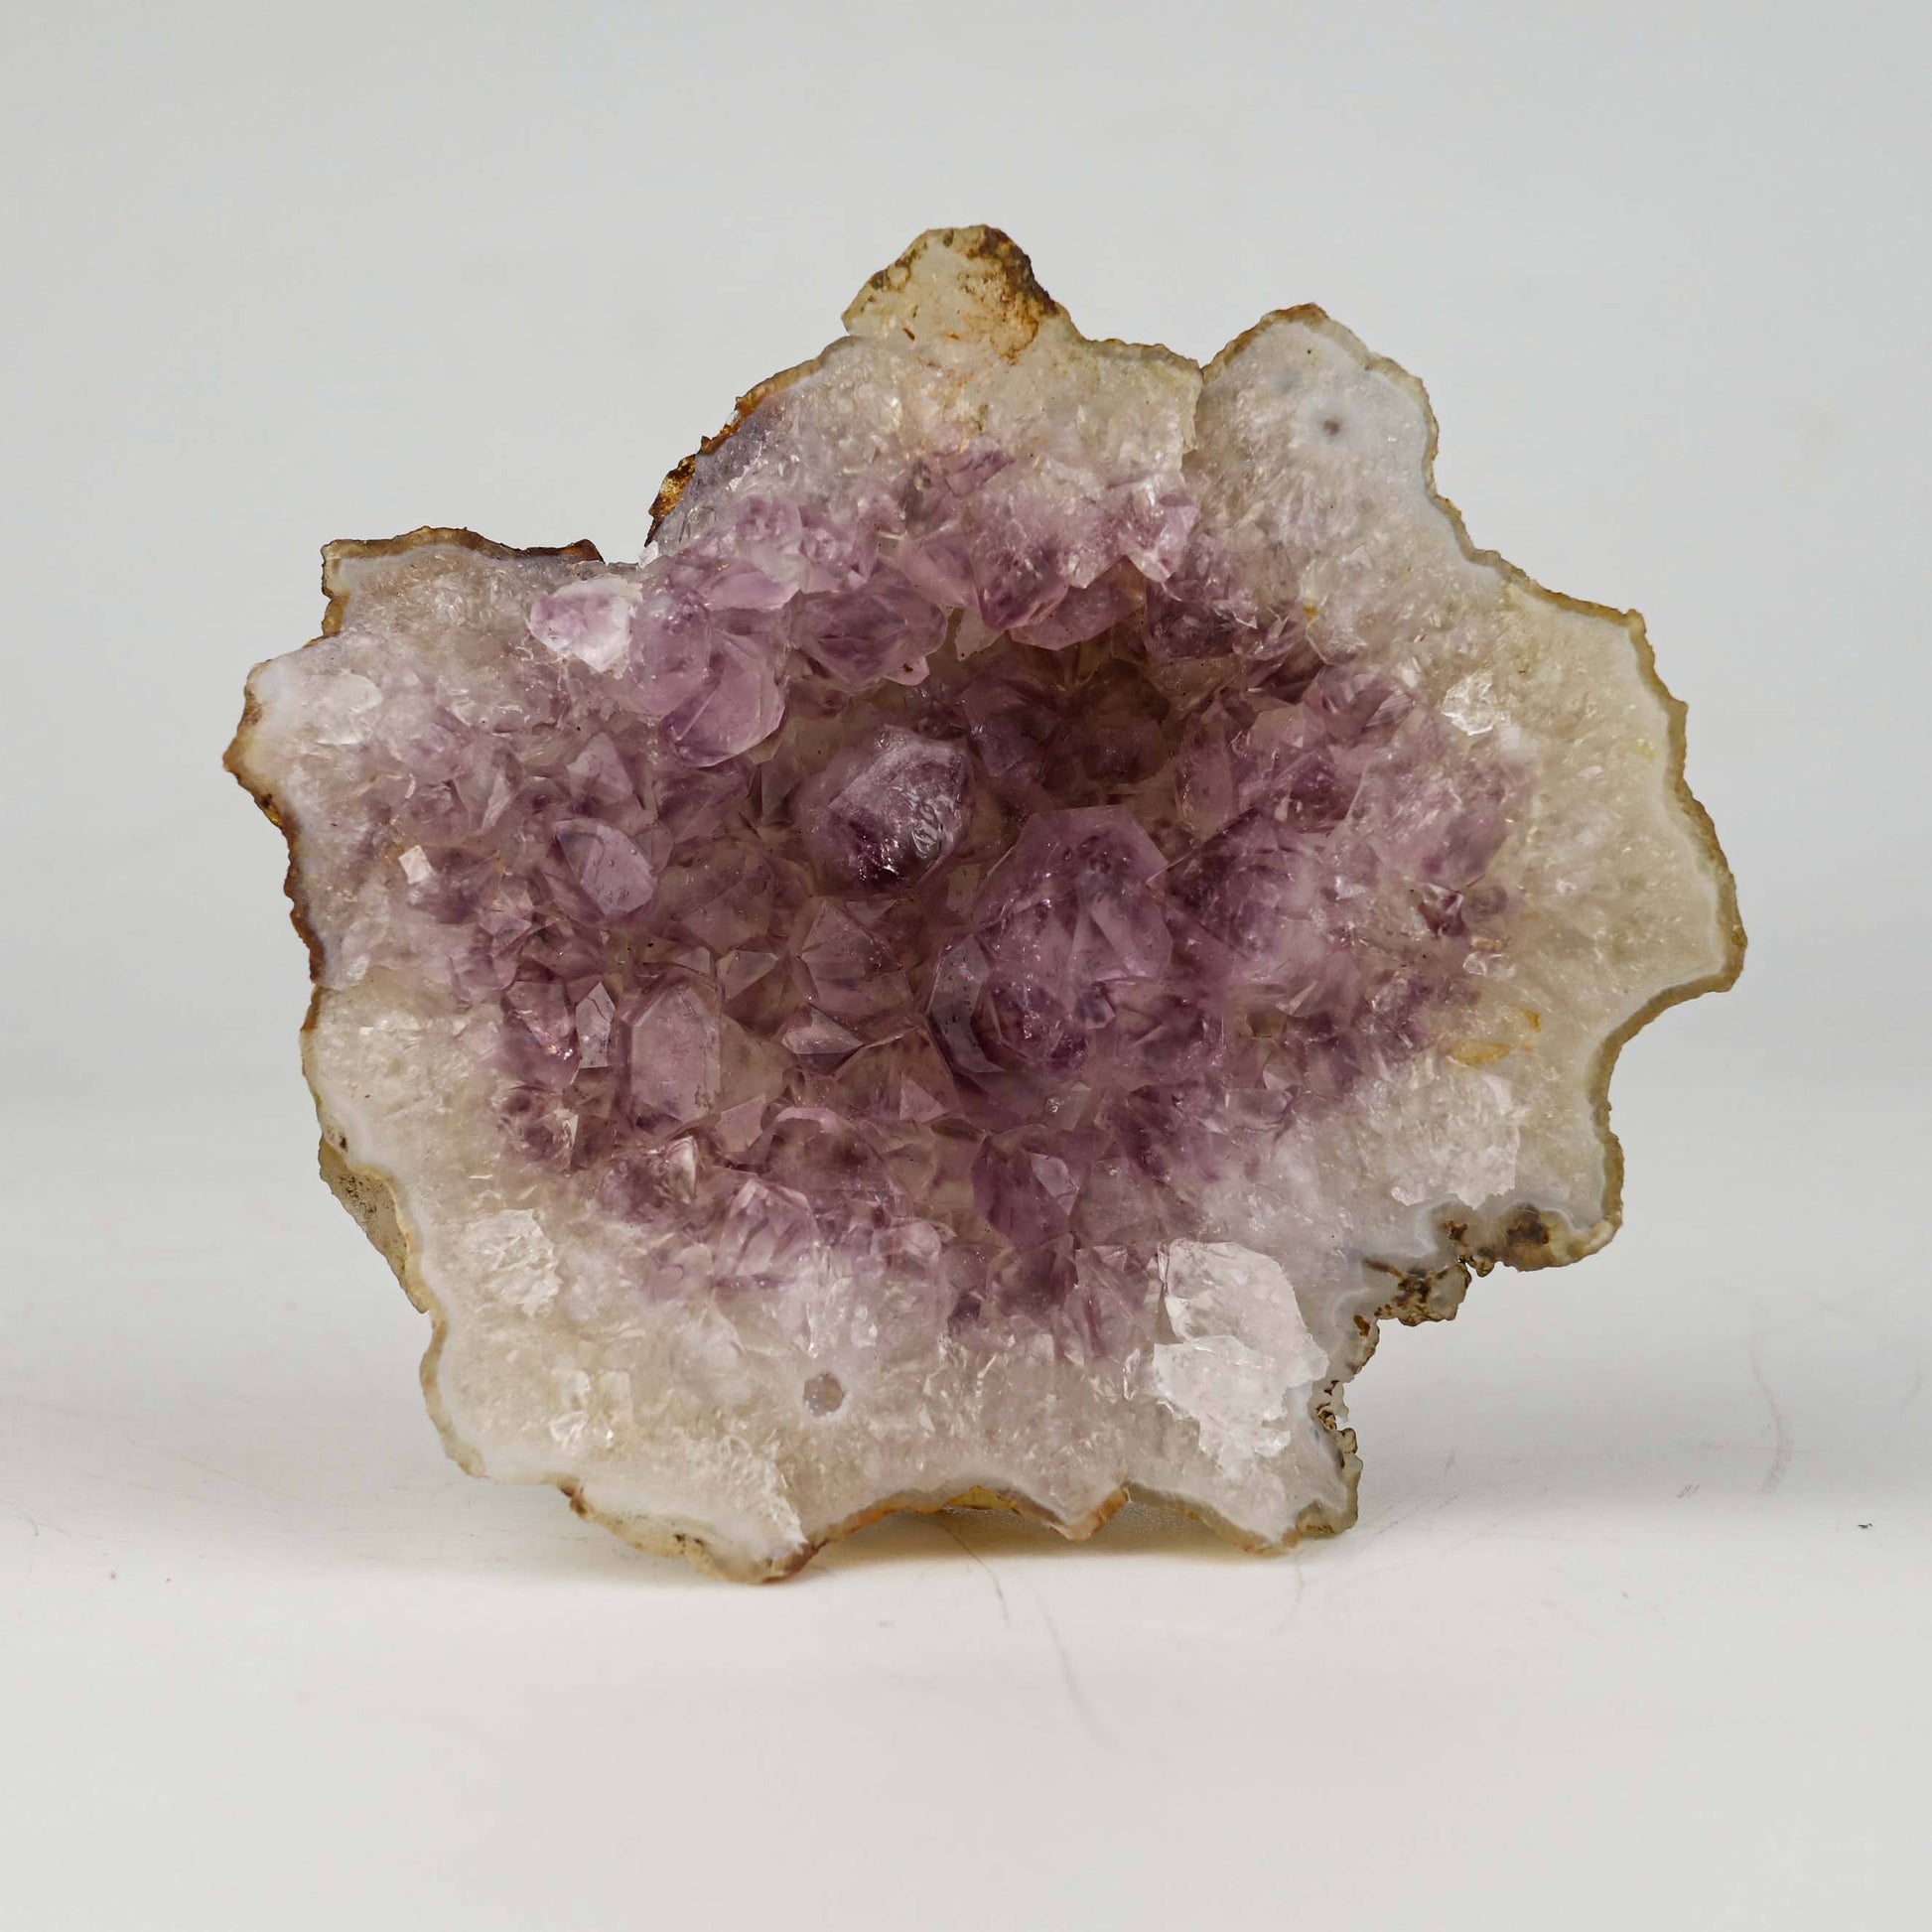 Amethyst Purple Crystals Geode (2 Halves ) Natural Mineral Specimen #…  https://www.superbminerals.us/products/amethyst-purple-crystals-geode-2-halves-natural-mineral-specimen-b-4936  Features: An extremely stylish piece highlighting two parts of an Amethyst Geode. The Amethyst crystals are on a Quartz which itself is on layers of clear, dark/blue Chalcedony. The tone, shine and differentiation is astonishing. Furthermore, to see two coordinated parts showed is an eye-catcher. 